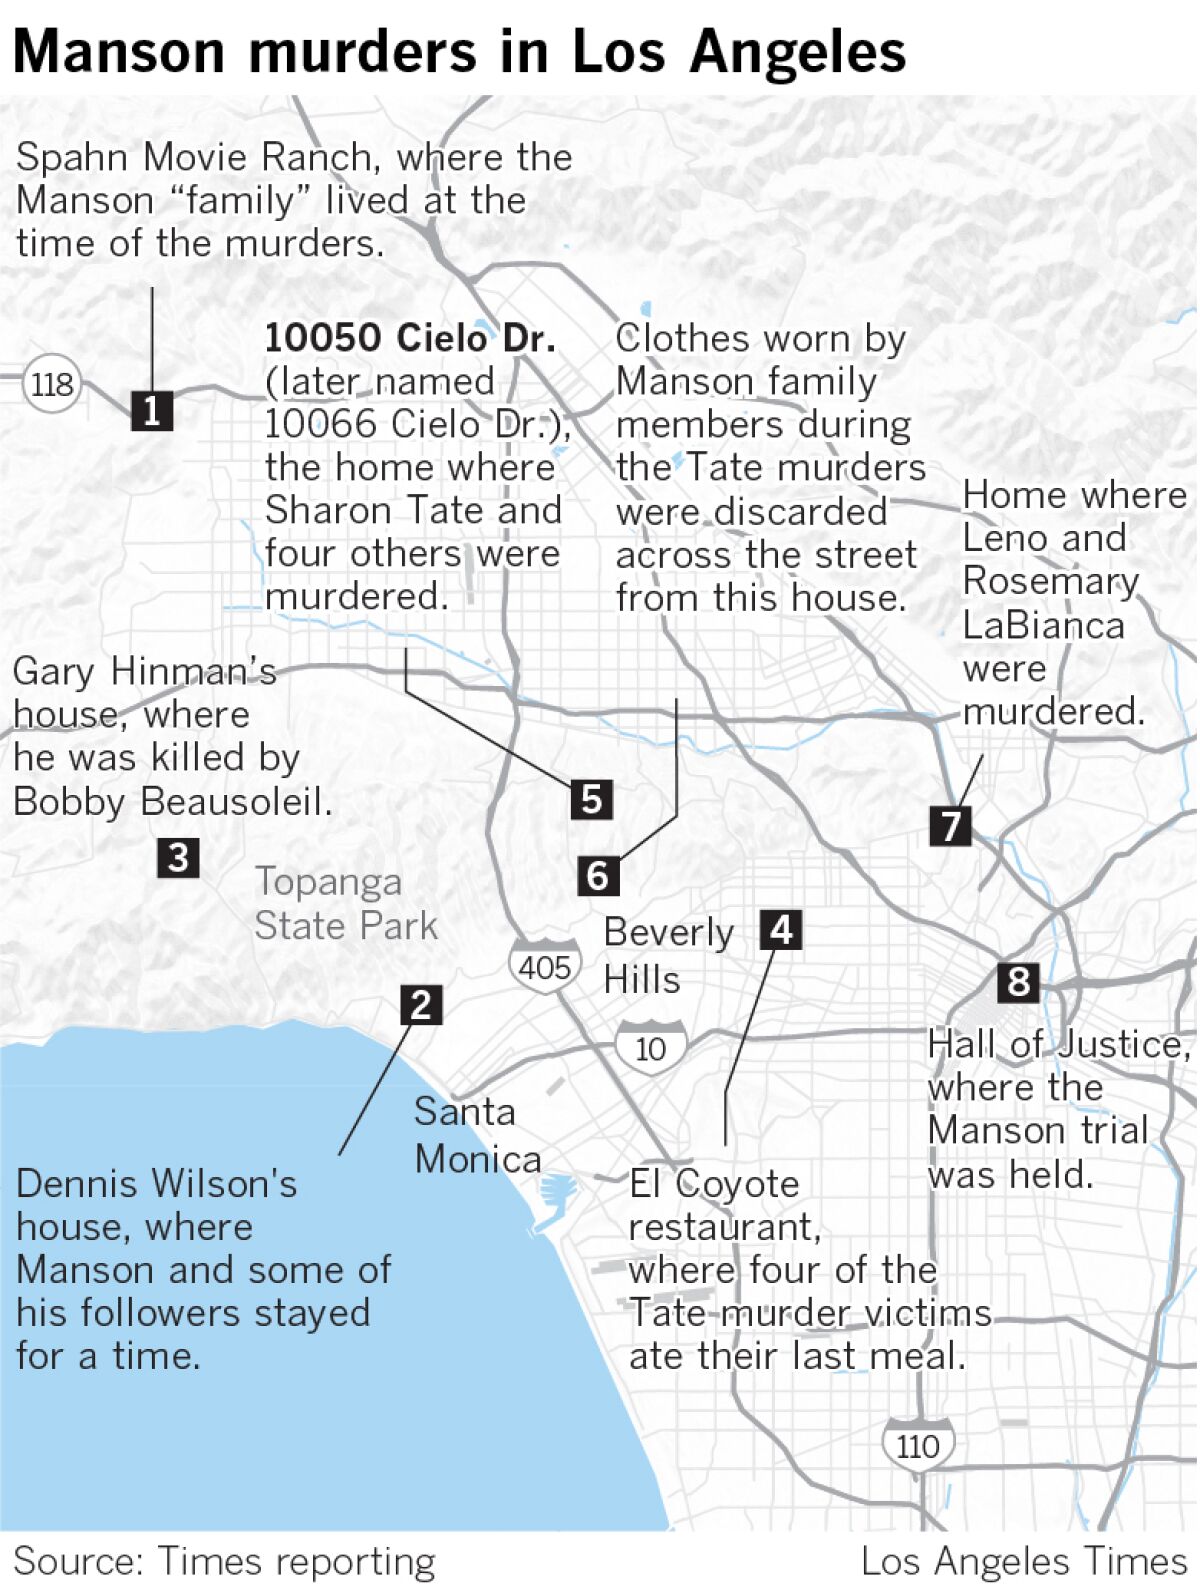 Map showing key locations of the Manson family murders.